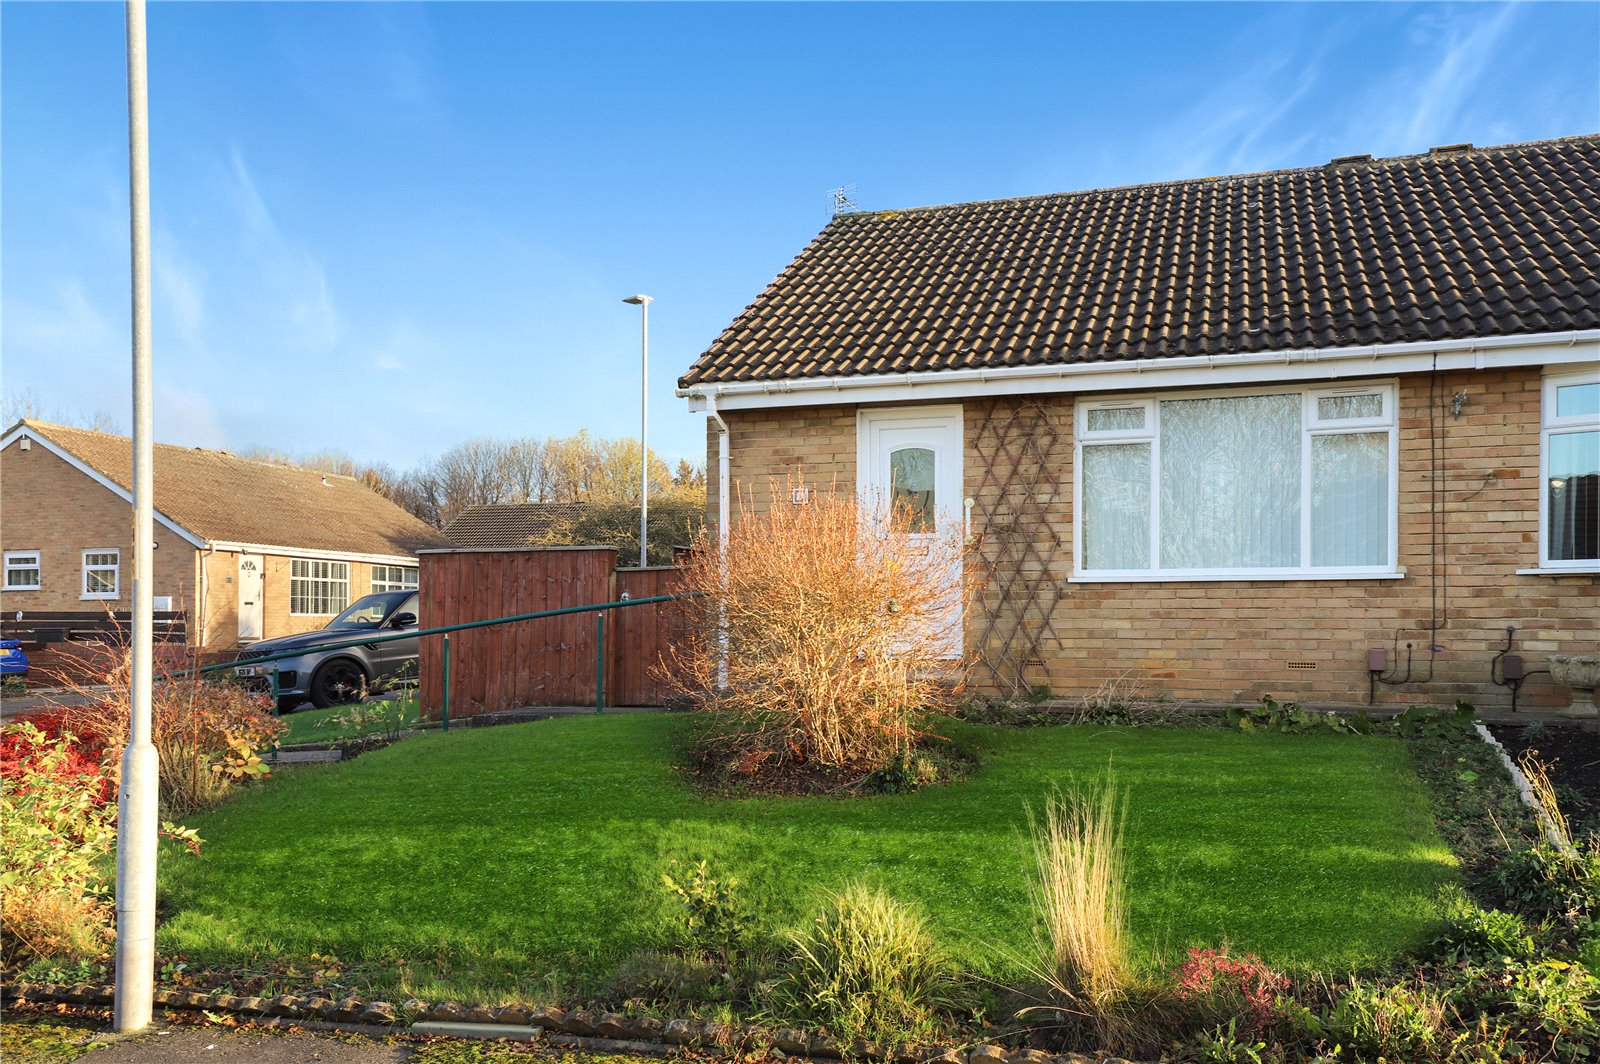 2 bed bungalow for sale in Kennthorpe, Nunthorpe 1